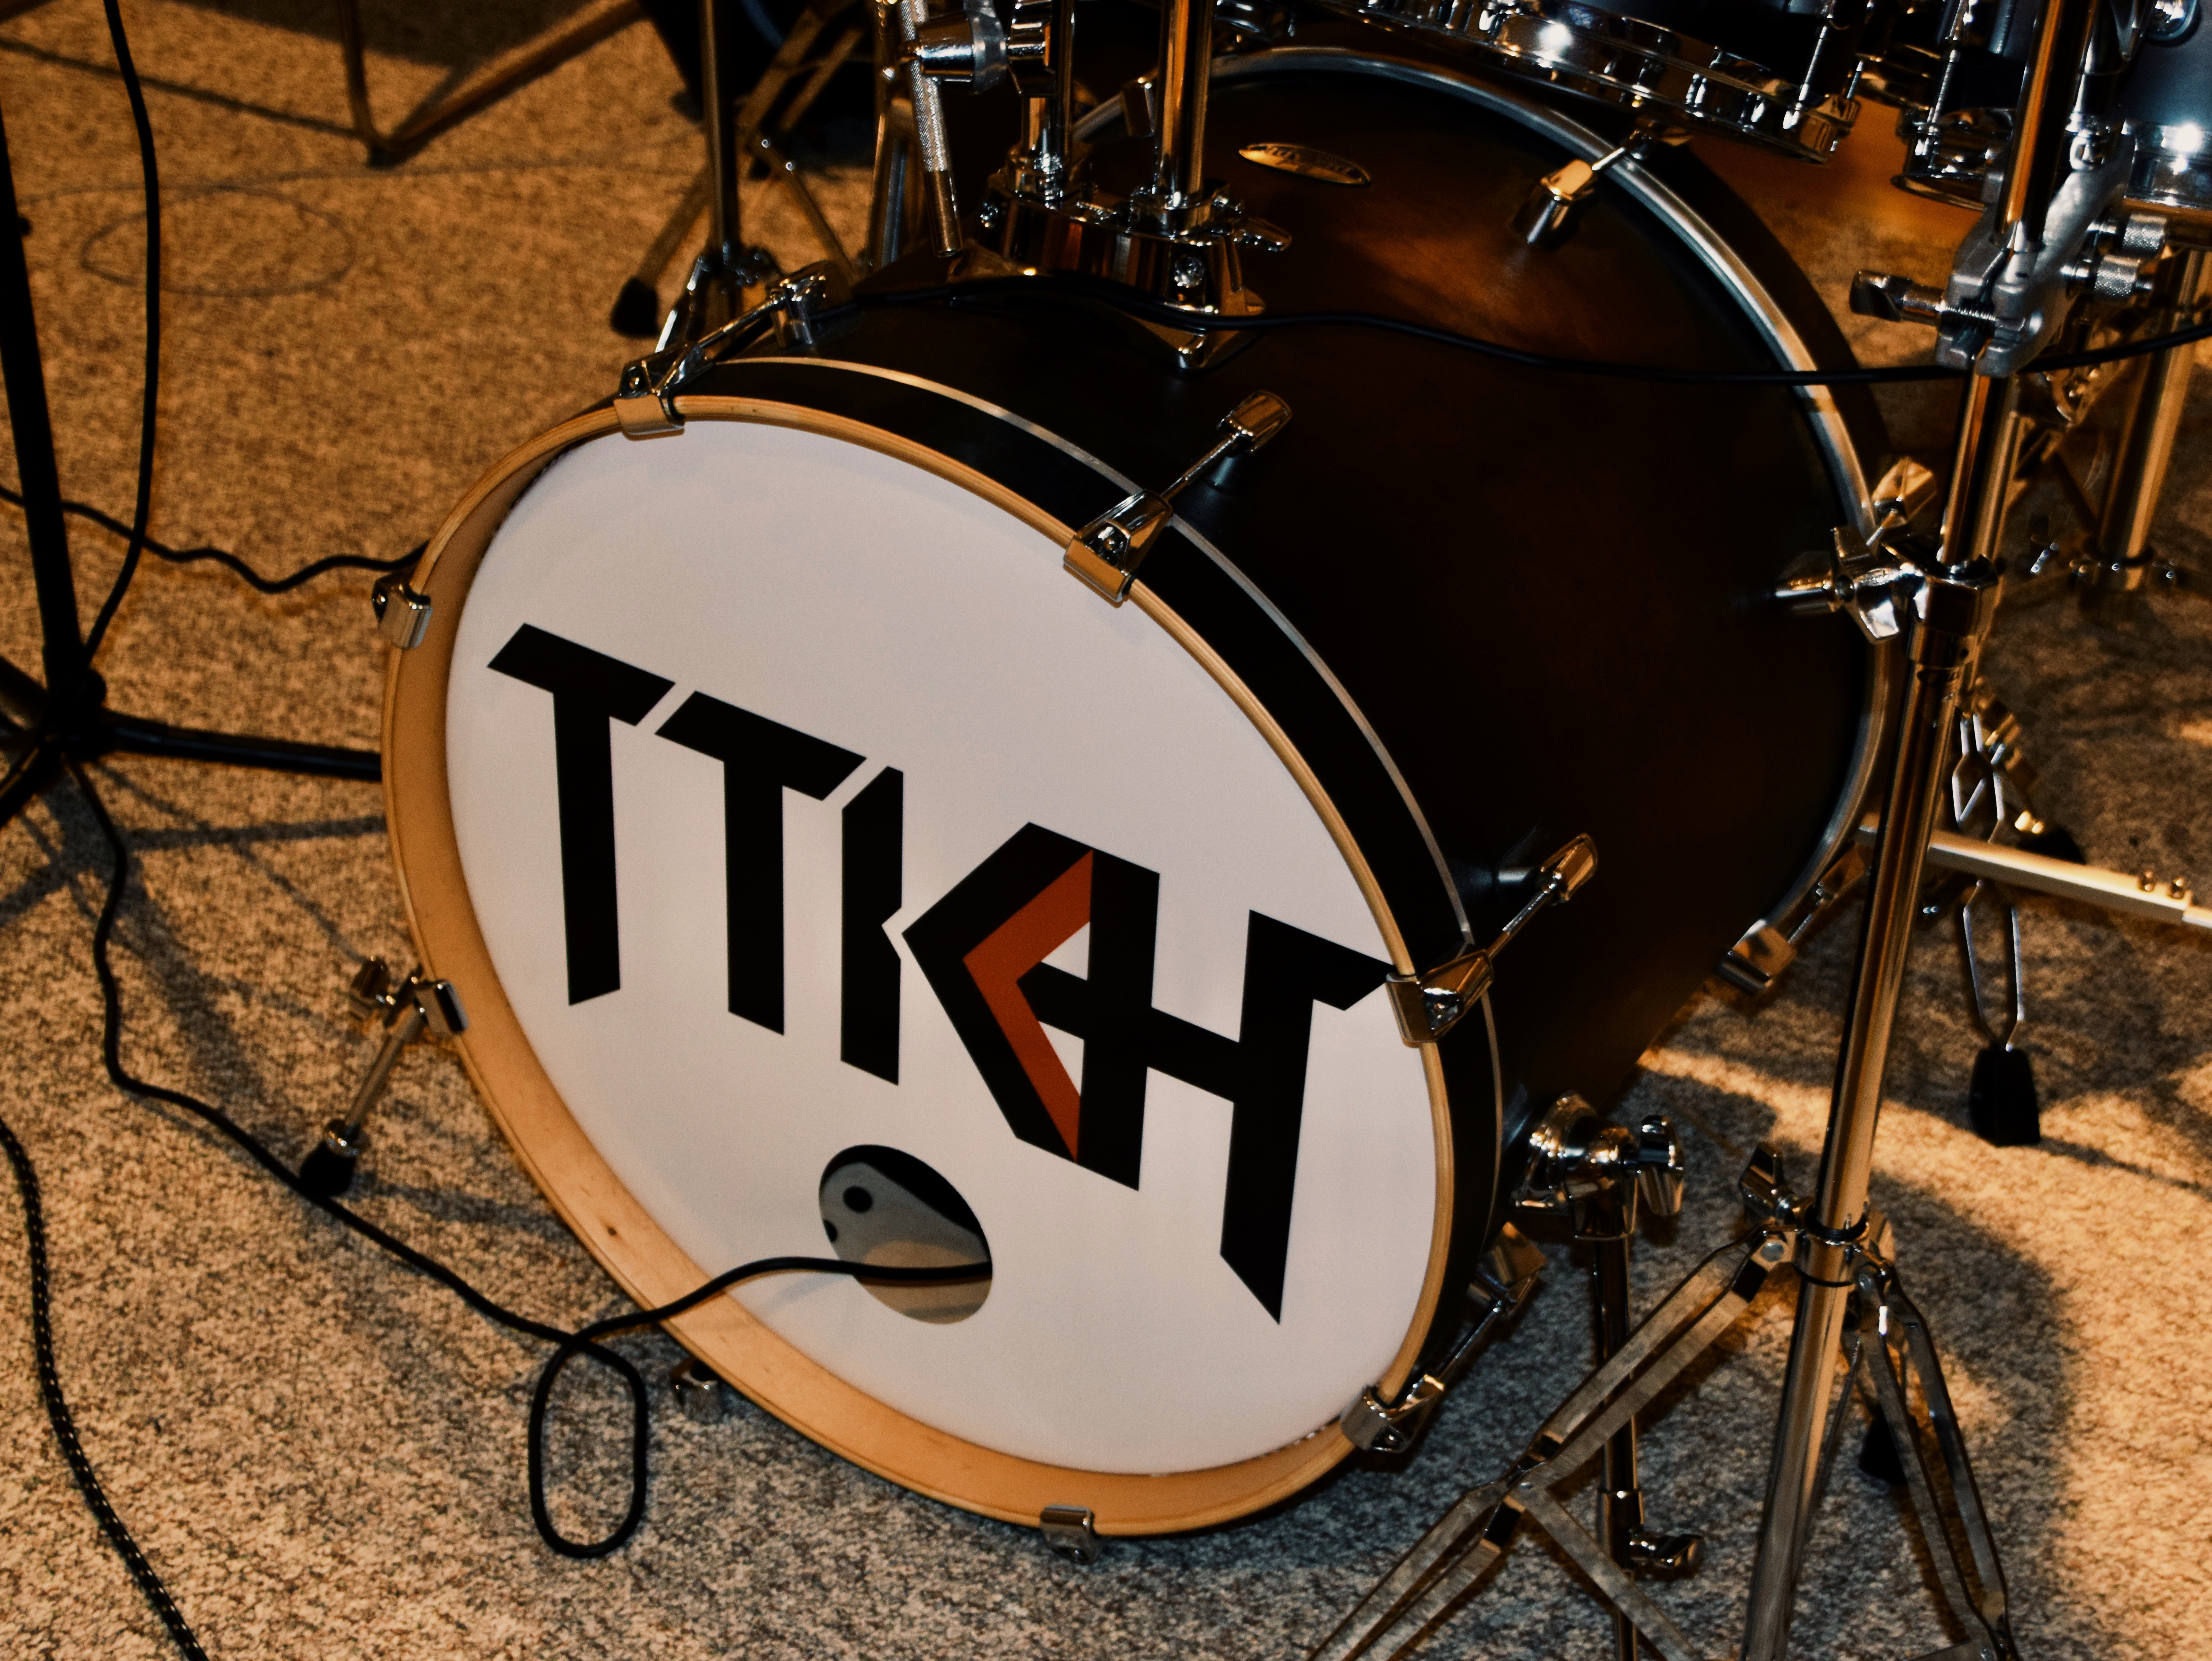 Close up of the kick drum with the TTKH logo on it